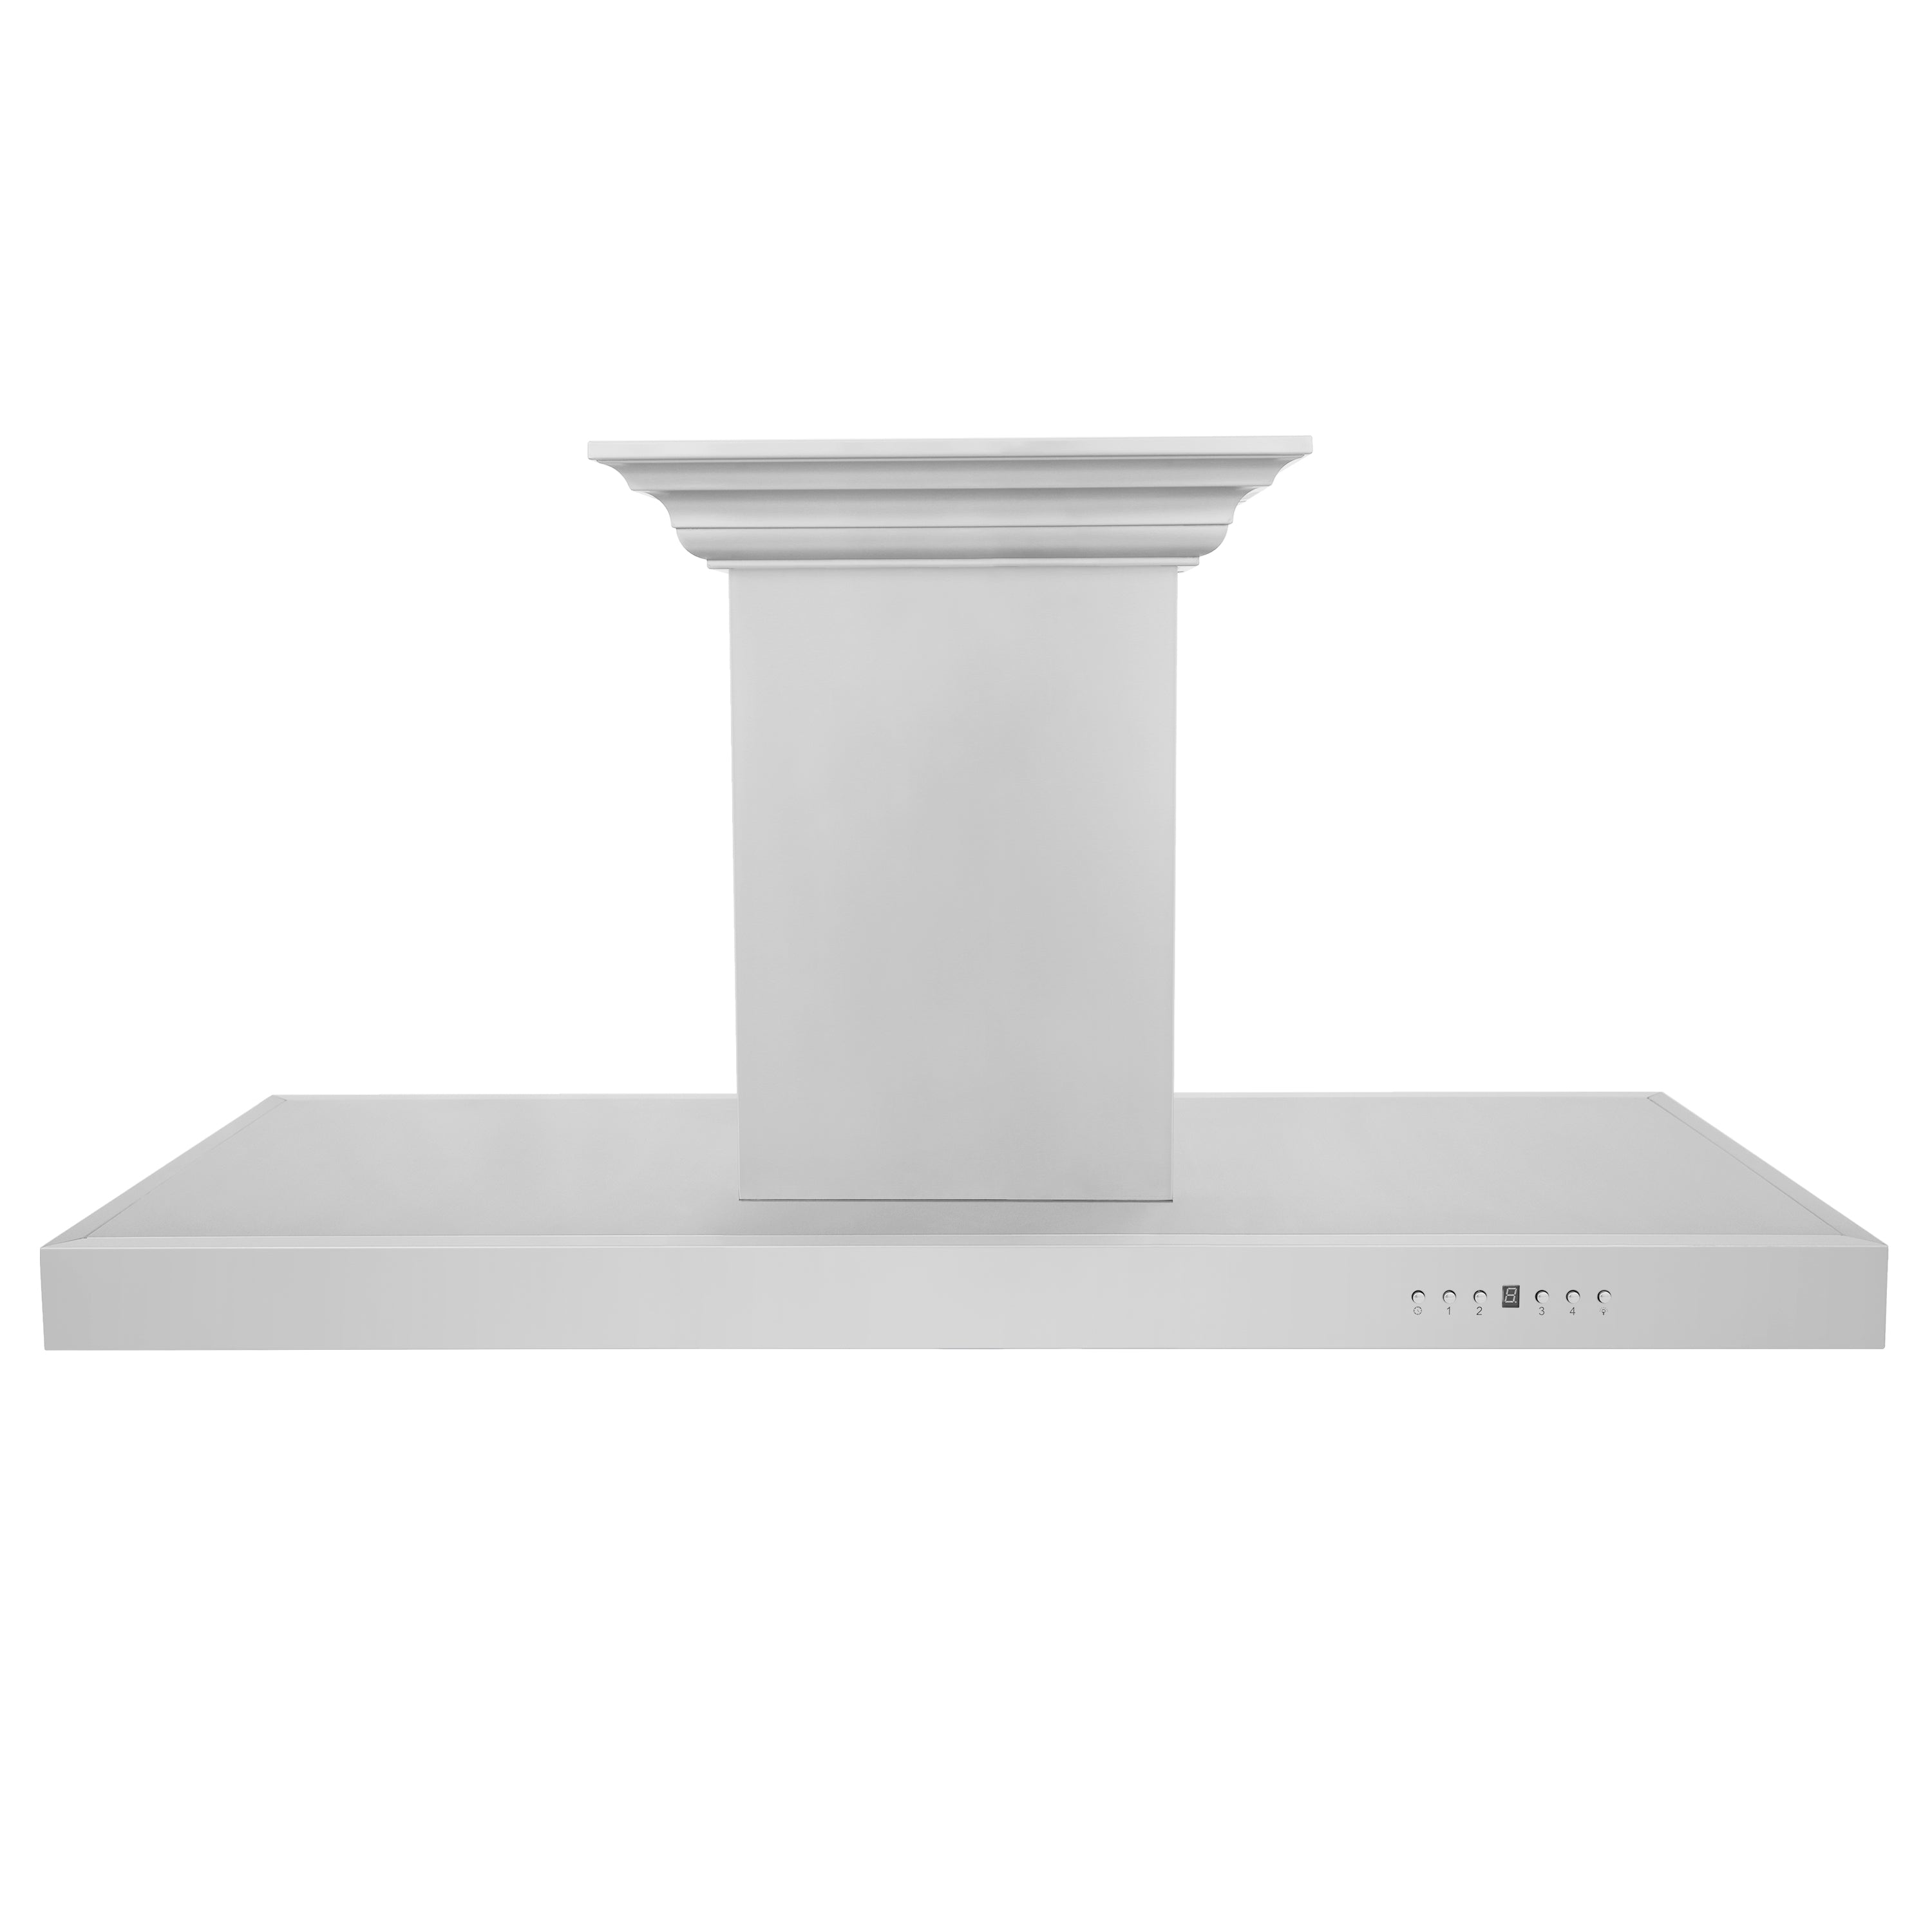 42" ZLINE CrownSound® Ducted Vent Island Mount Range Hood in Stainless Steel with Built-in Bluetooth Speakers (KE2iCRN-BT-42)